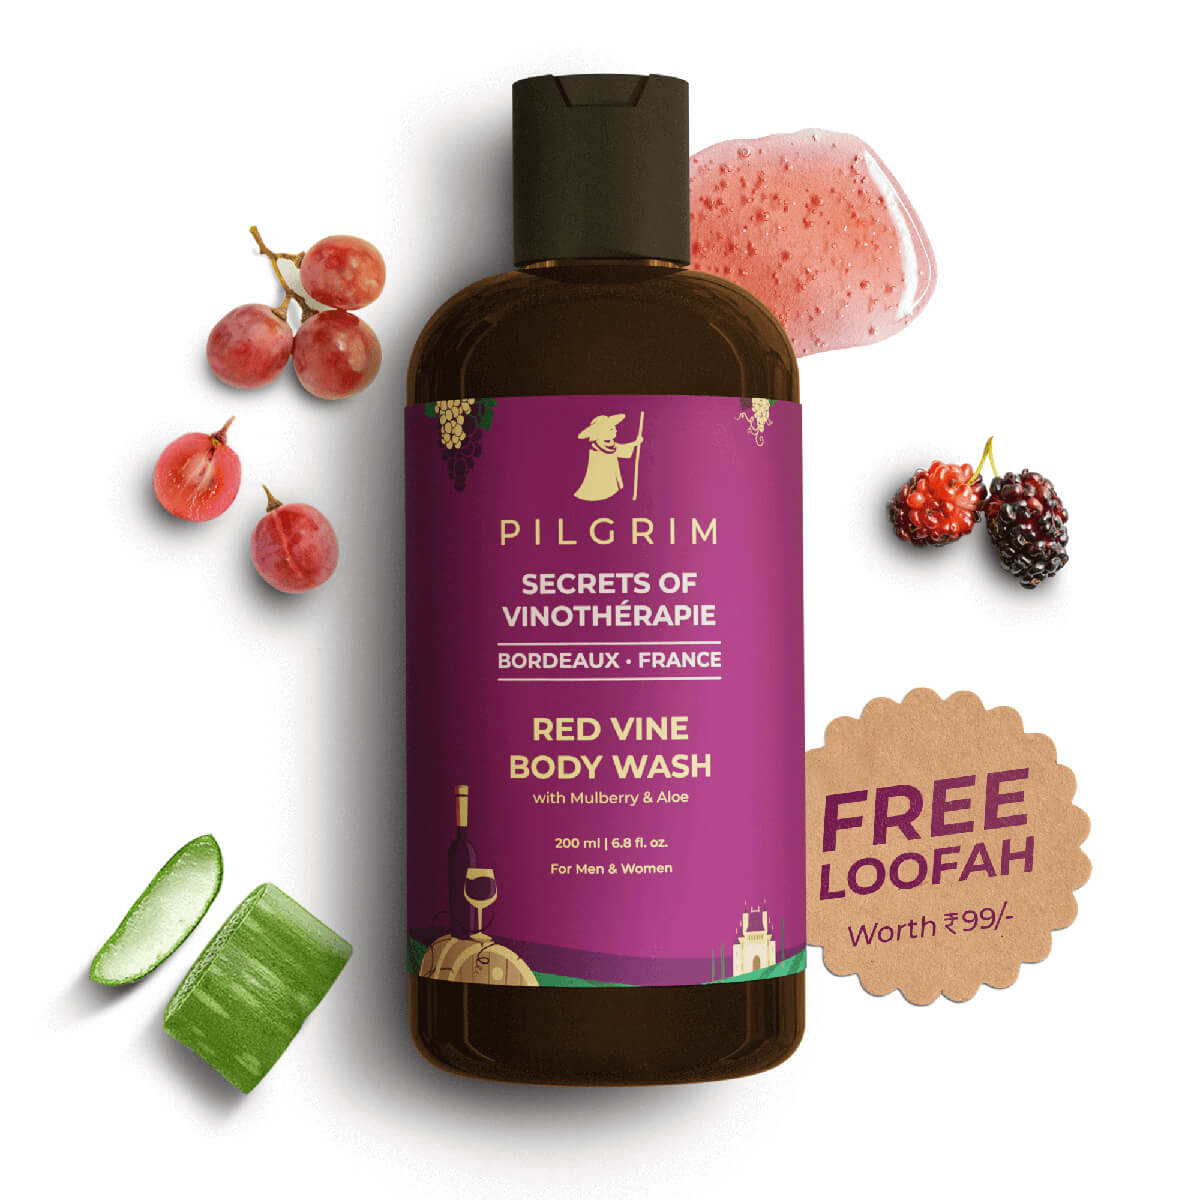 Red Vine Body Wash with Mulberry & Aloe